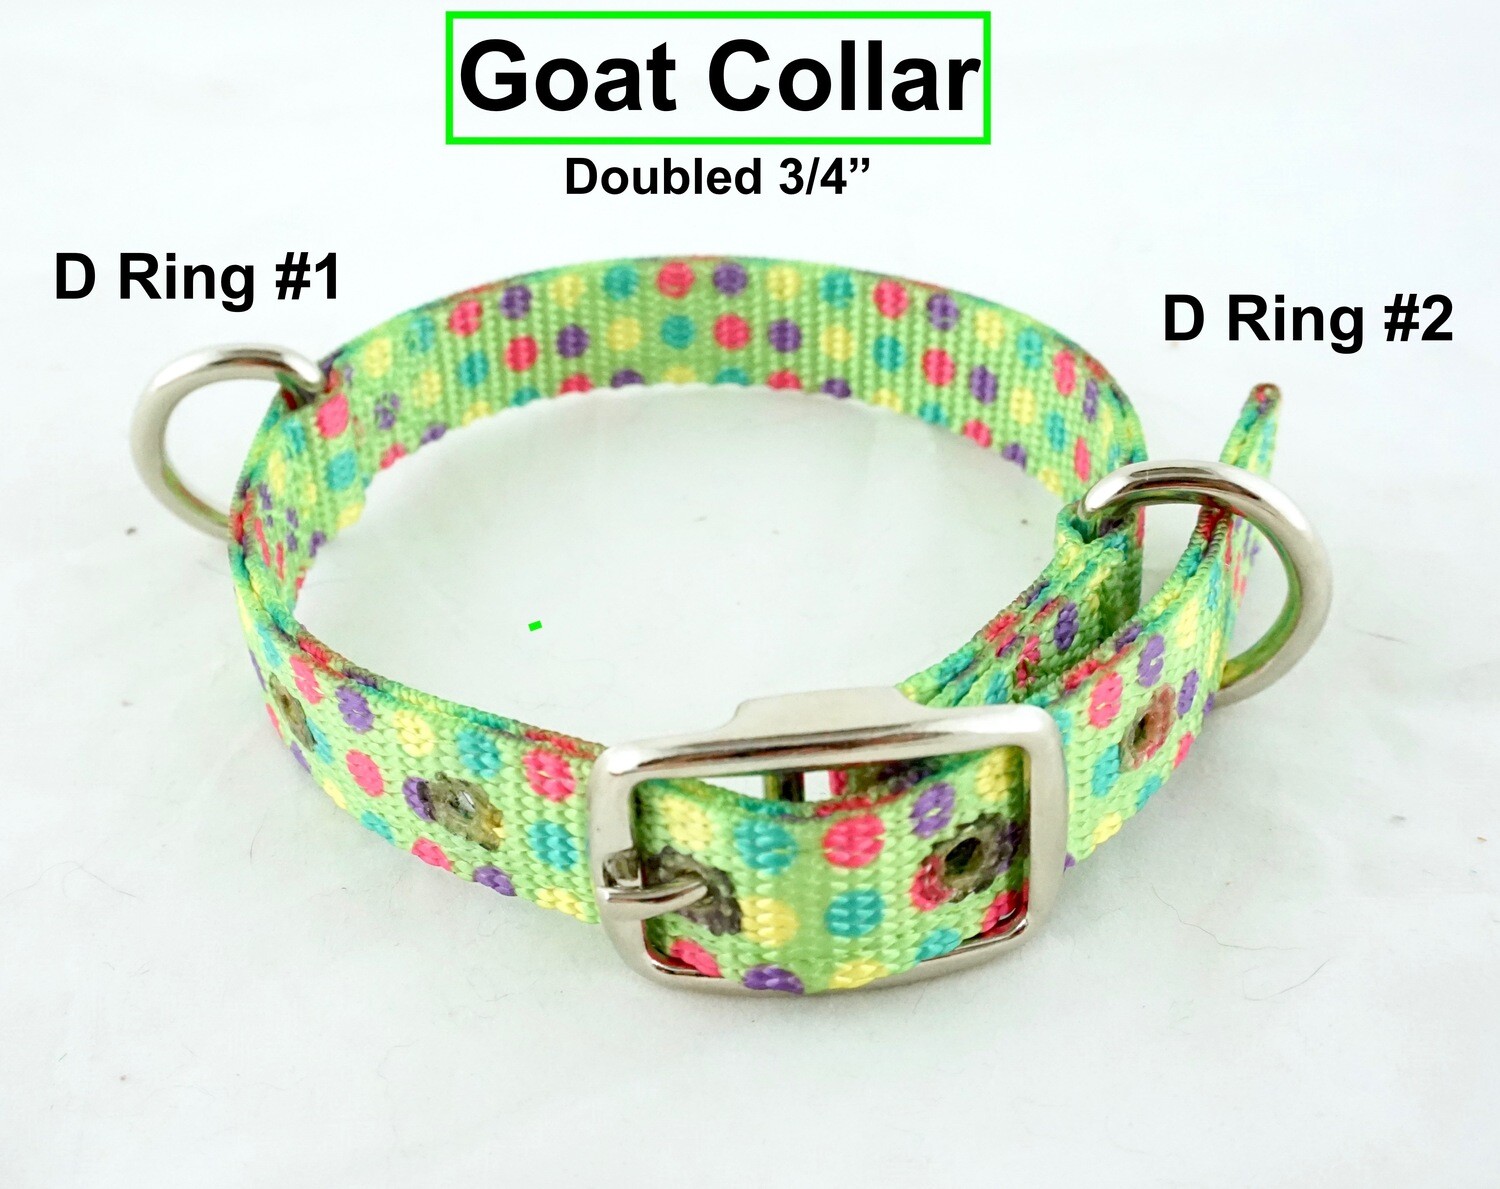 Halter-All™ - Goat Collar XS-XL - Doubled, Extra D Ring, Patterns